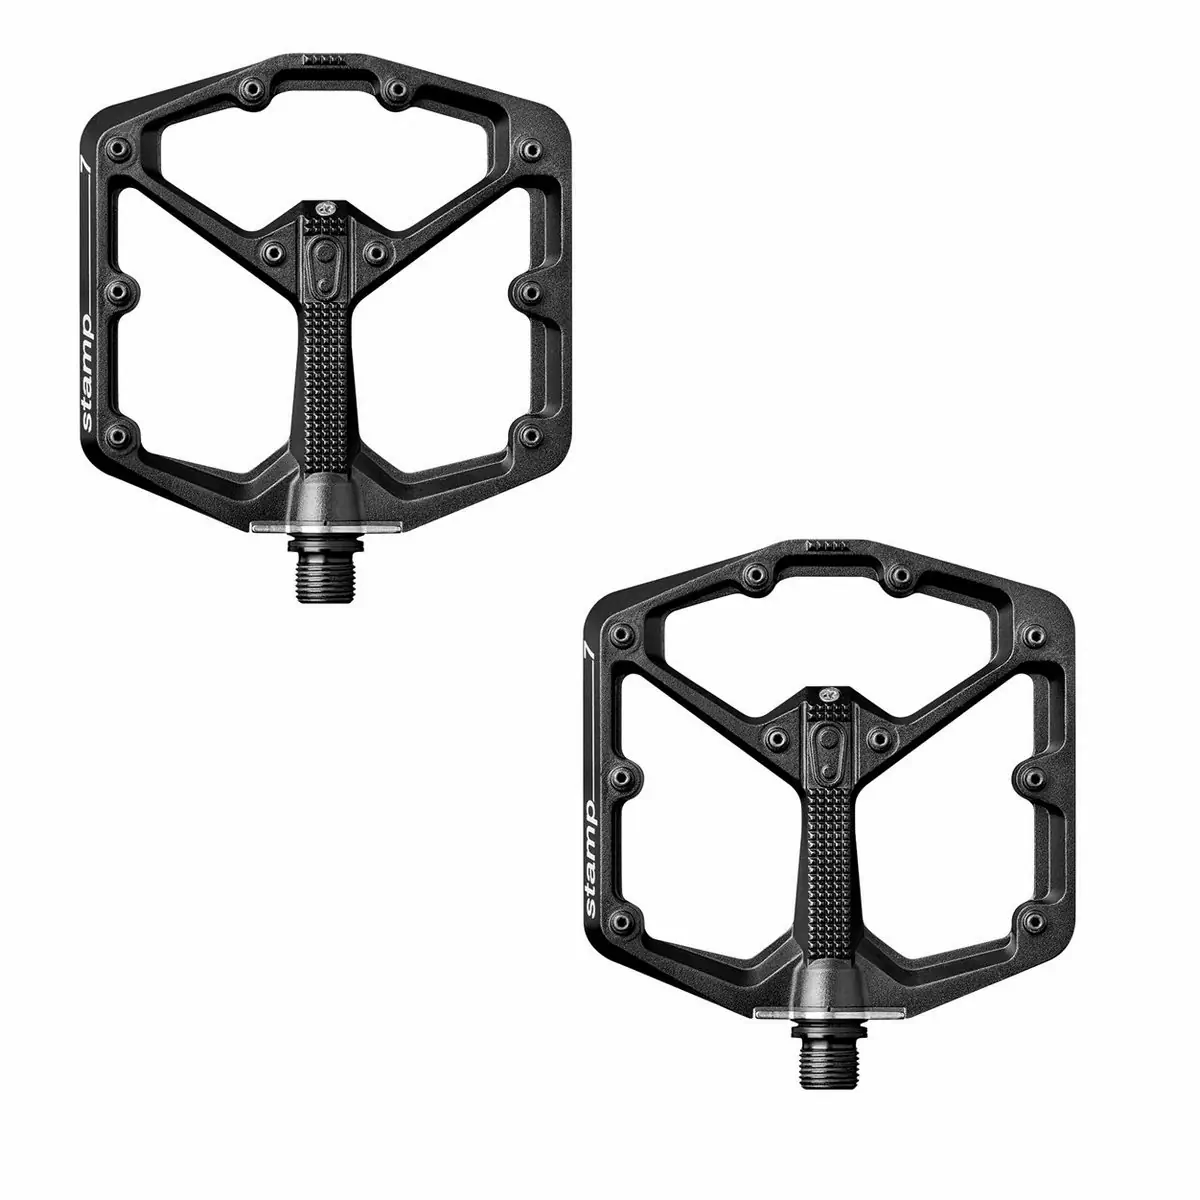 Stamp 7 Small – Crankbrothers